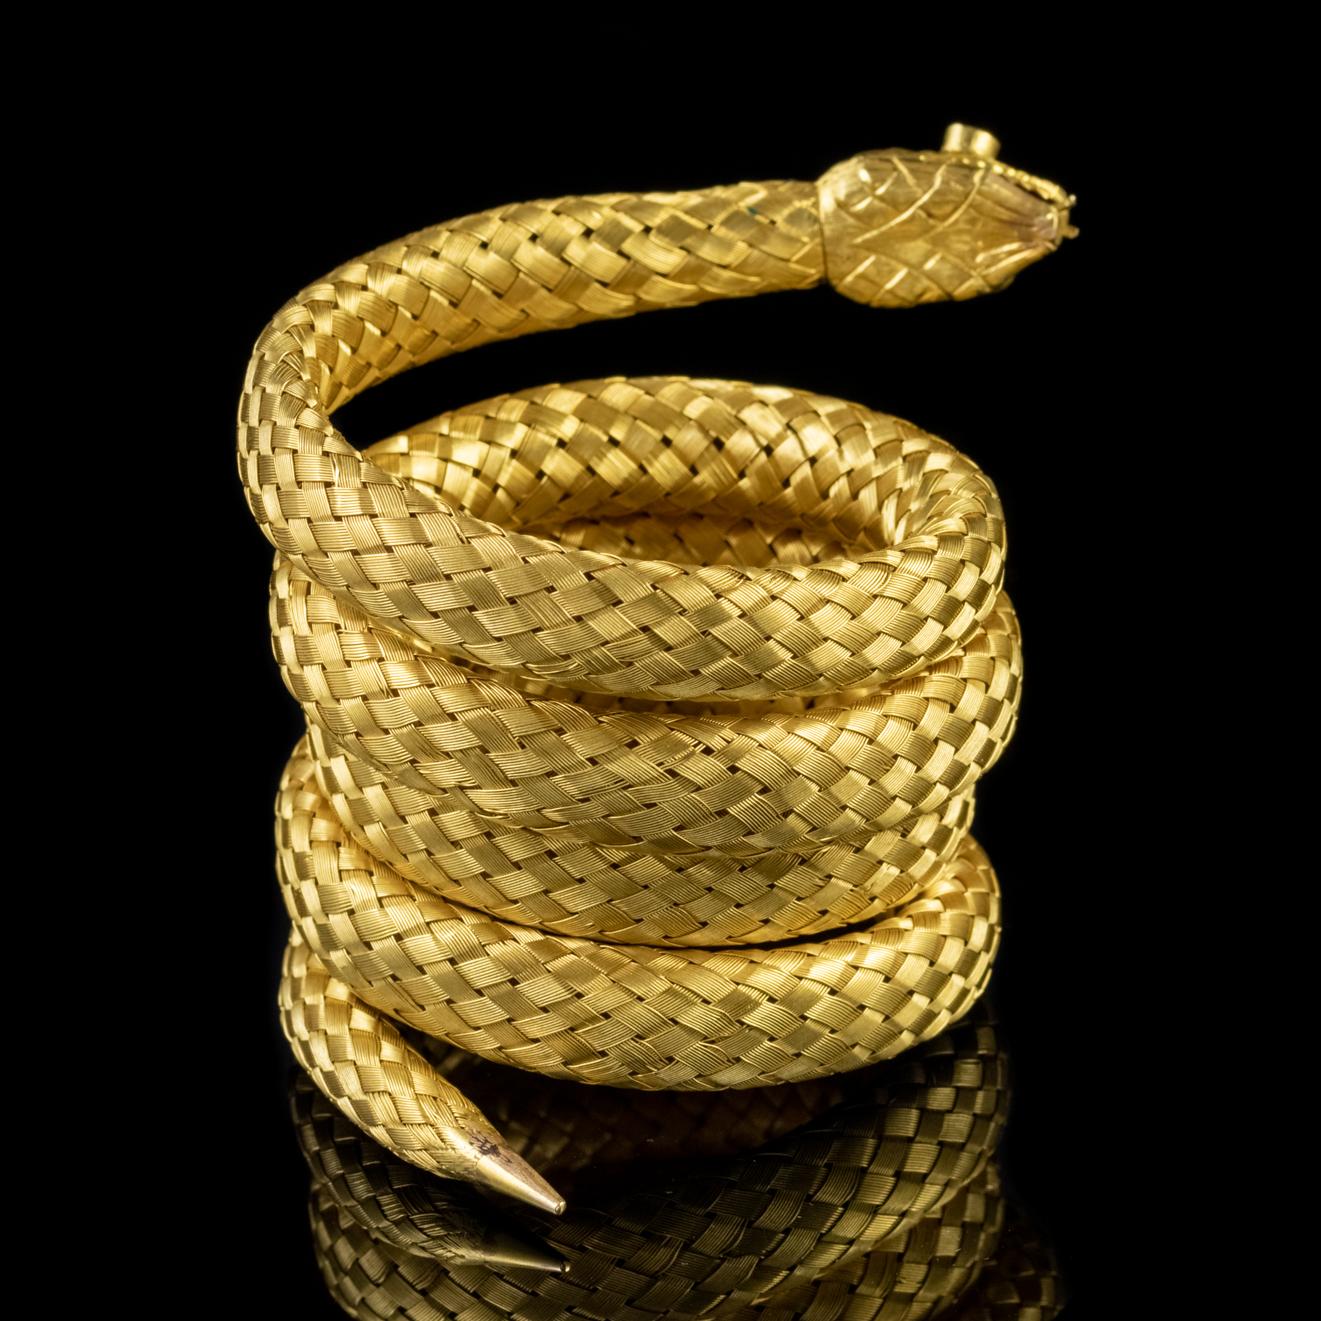 This fabulous antique Georgian coiled snake bracelet has been exquisitely crafted in 18ct Yellow Gold. Multiple strands of woven gold have been cunningly laced together to create a flexible body with scales running along its length.

The piece is